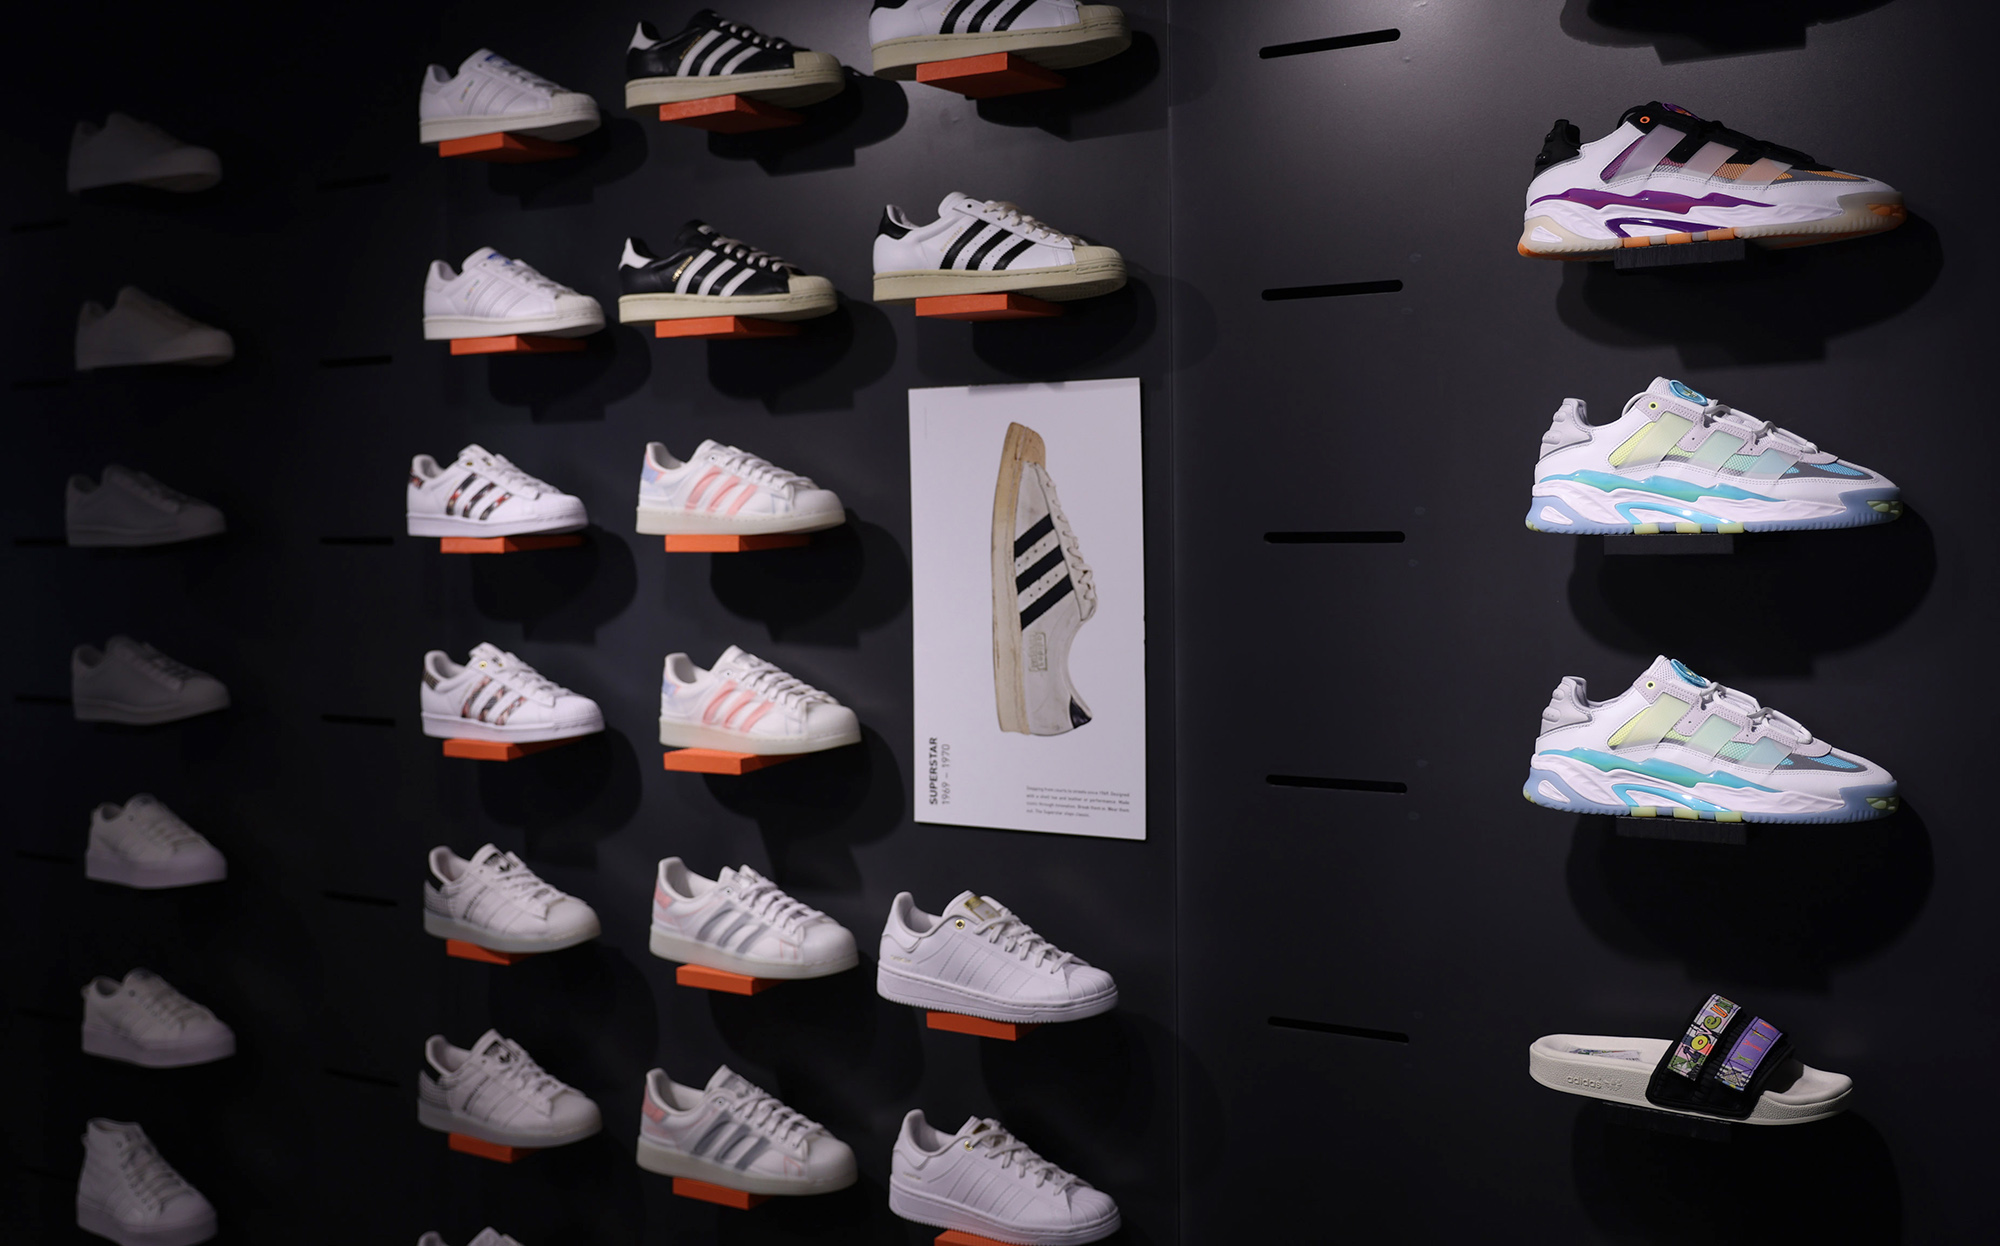 Adidas Next CEO Tough With Unsold Shoes Piling - Bloomberg